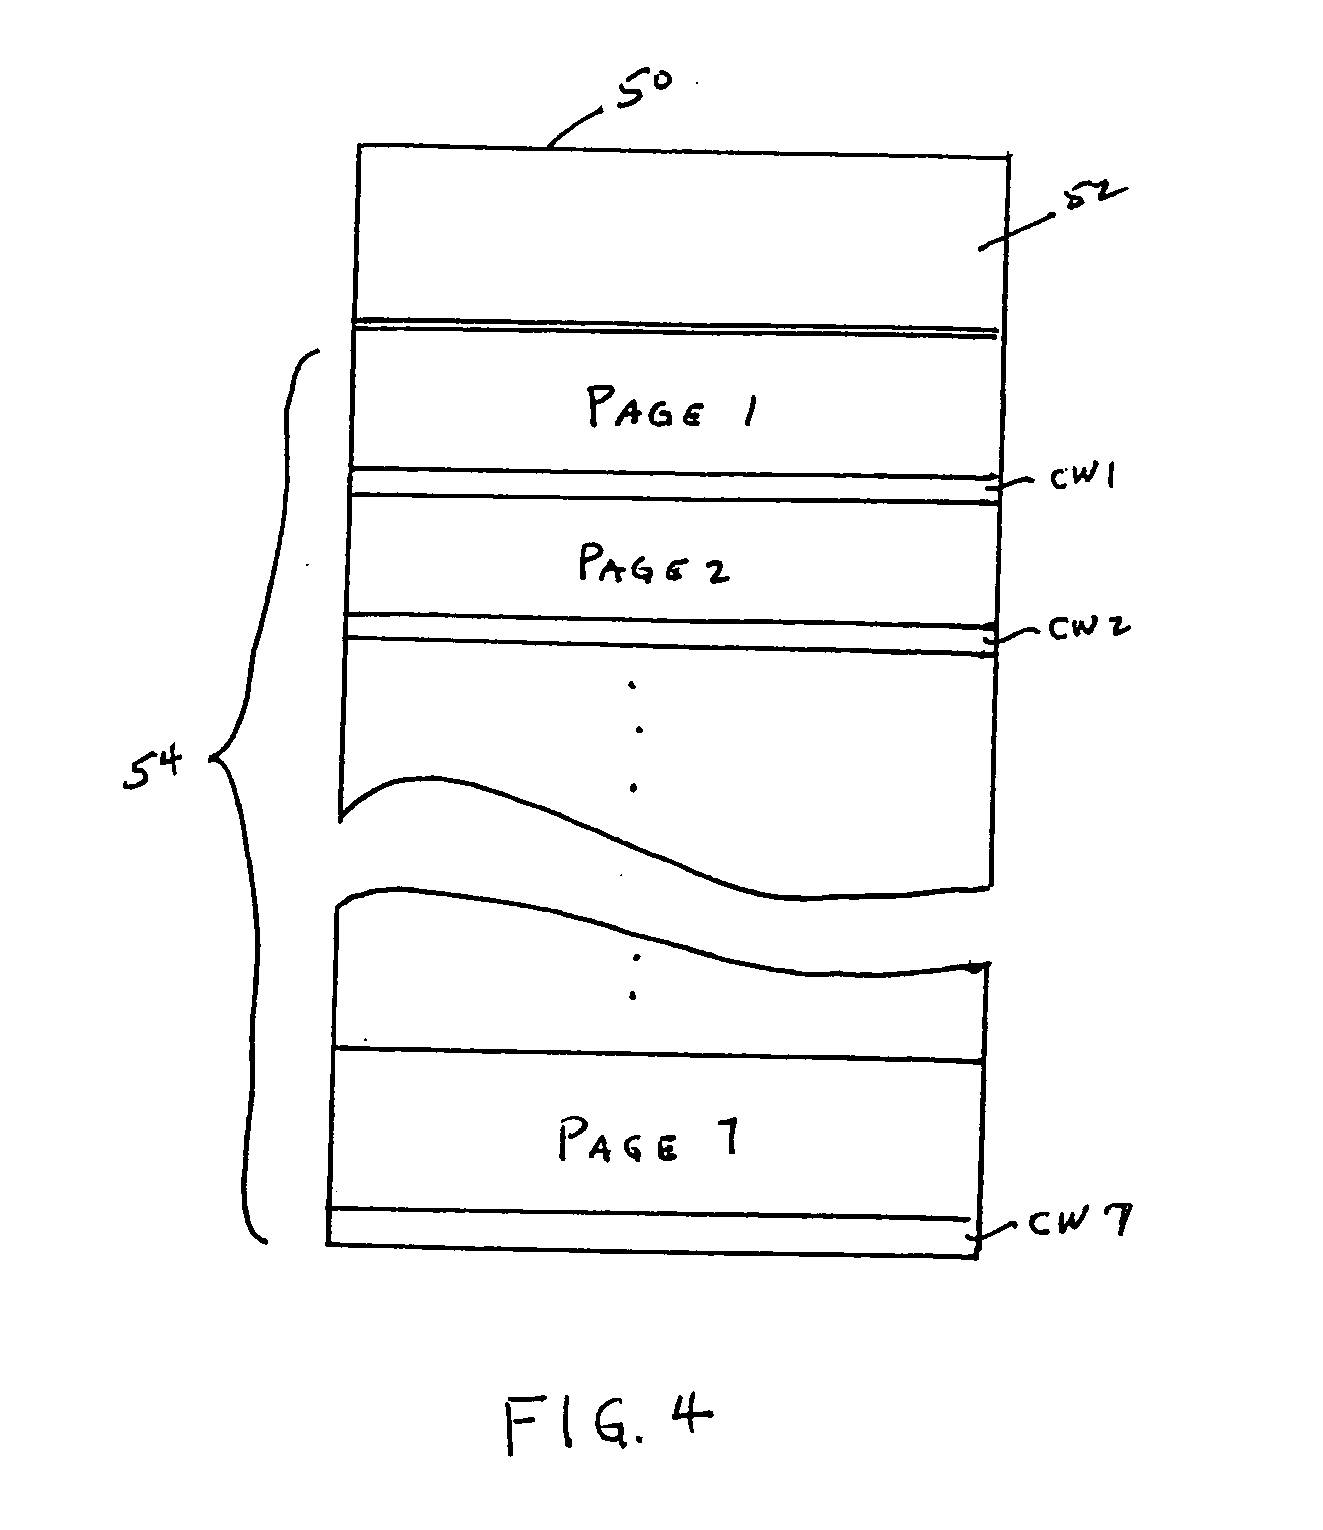 Method and apparatus for reprogramming a programmed controller of a power driven wheelchair